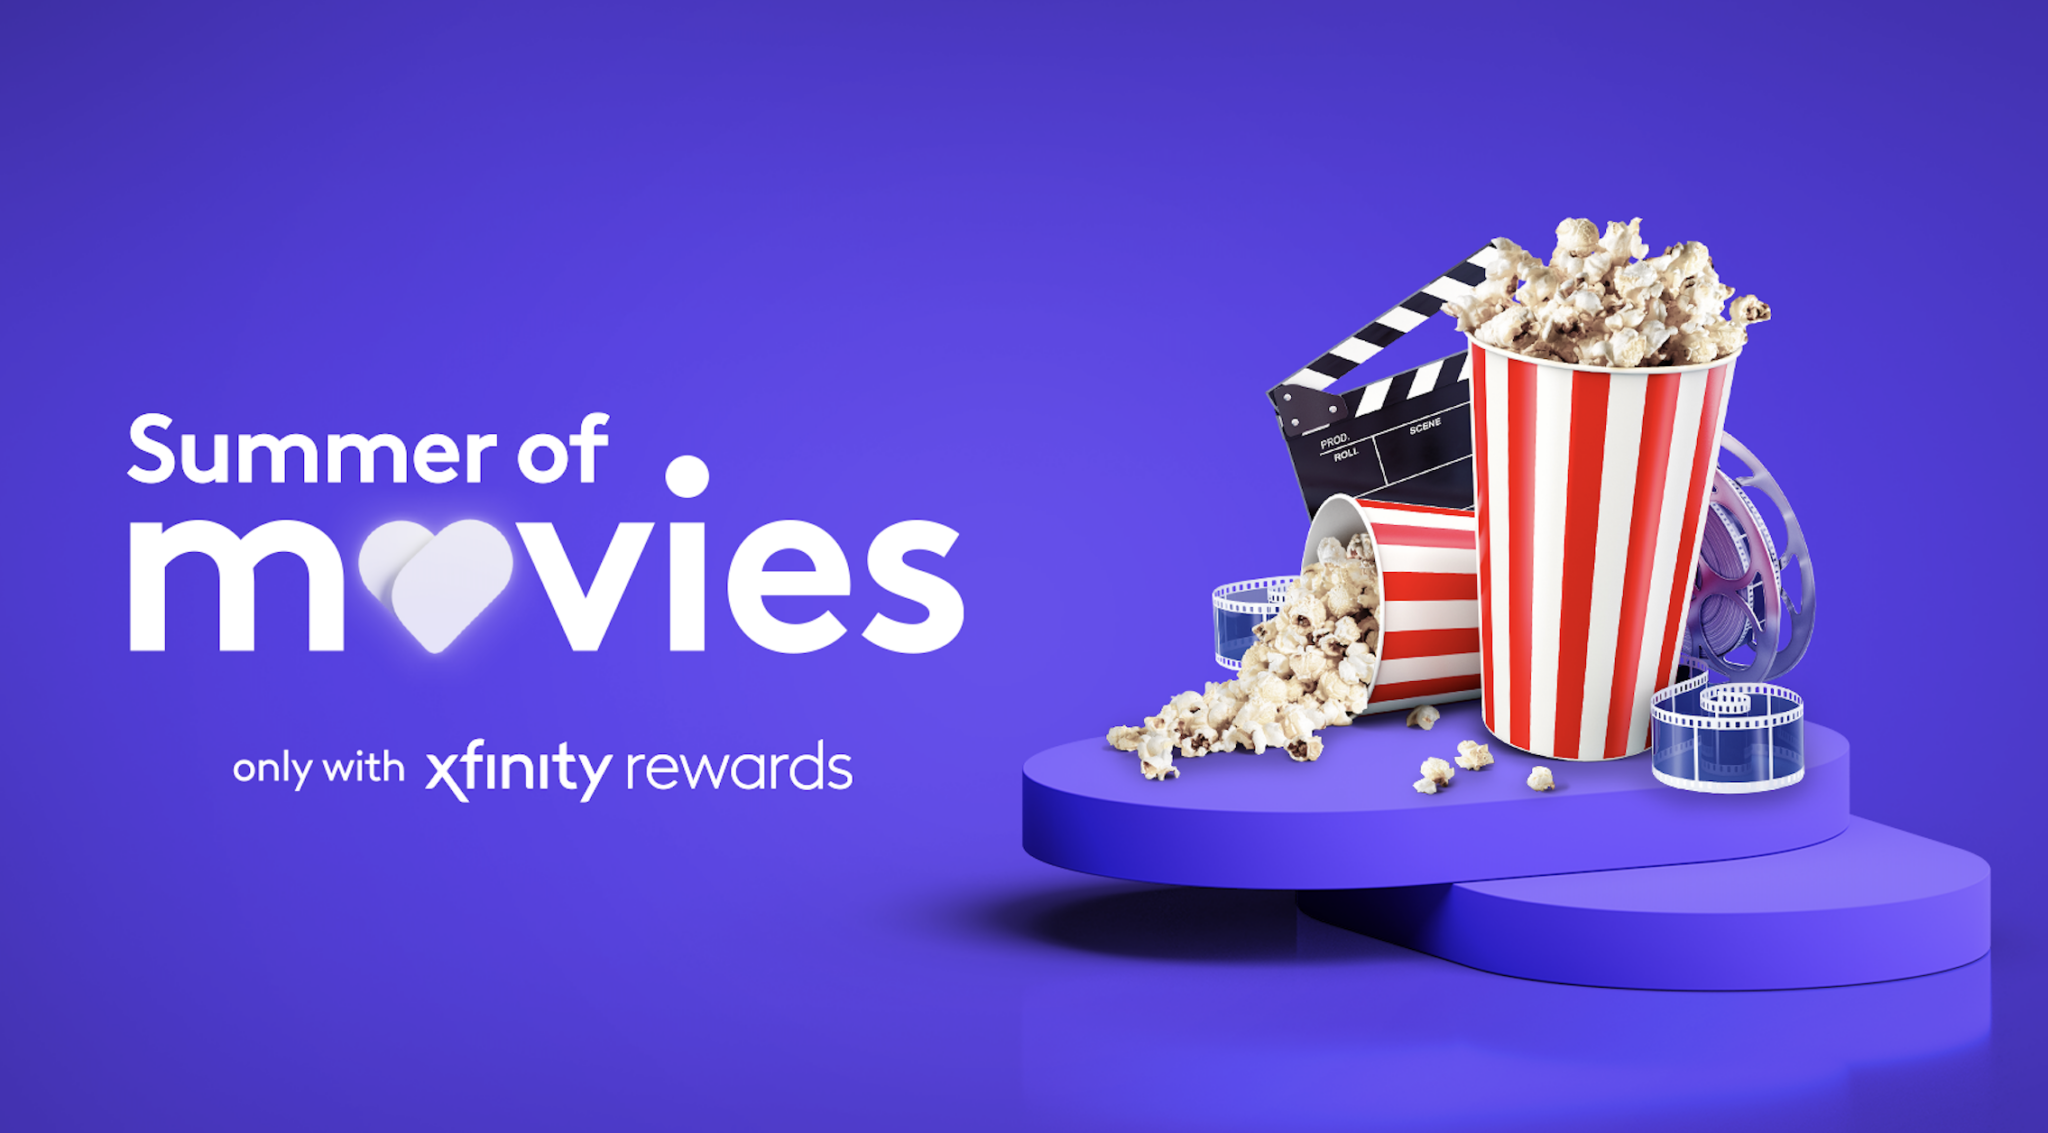 Xfinity "Summer of Movies" is Back and Bigger Than Ever with Tons of